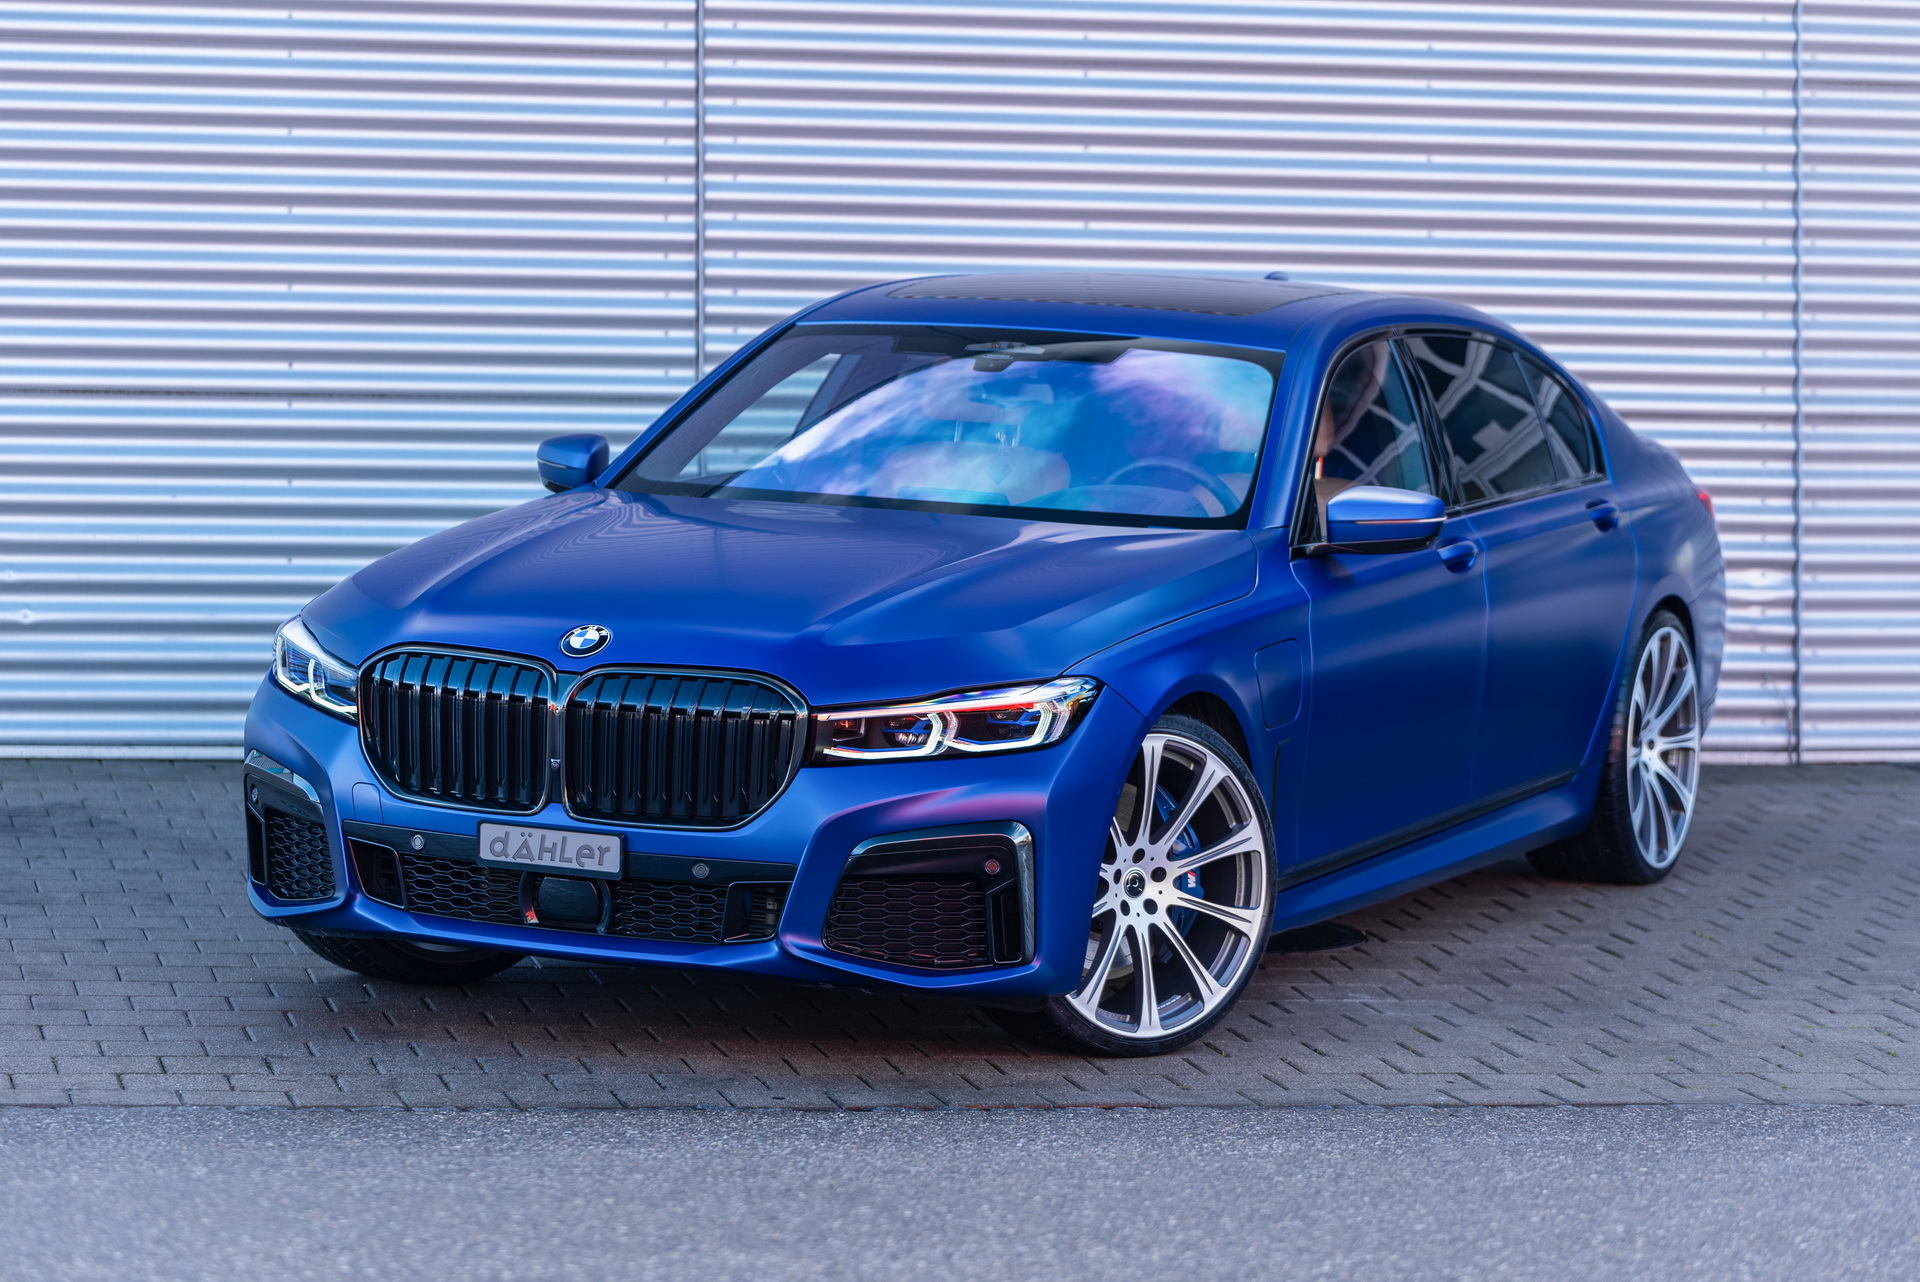 Dahler BMW 745Le xDrive has 521 HP and stunning looks